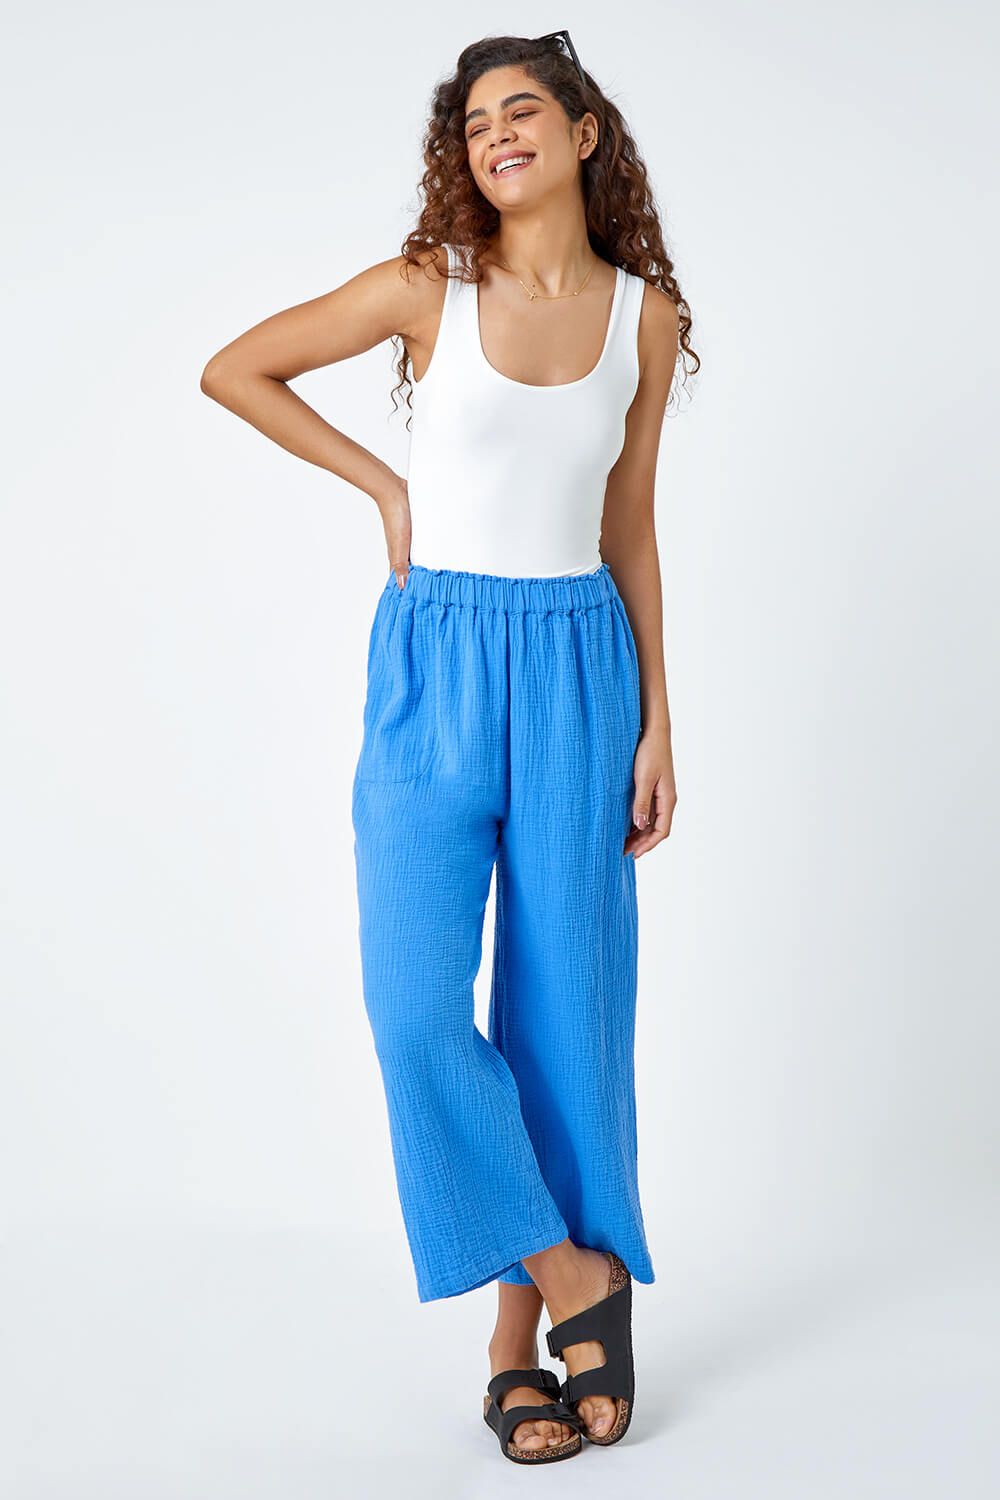 Blue Textured Cotton Culotte Trousers, Image 2 of 5